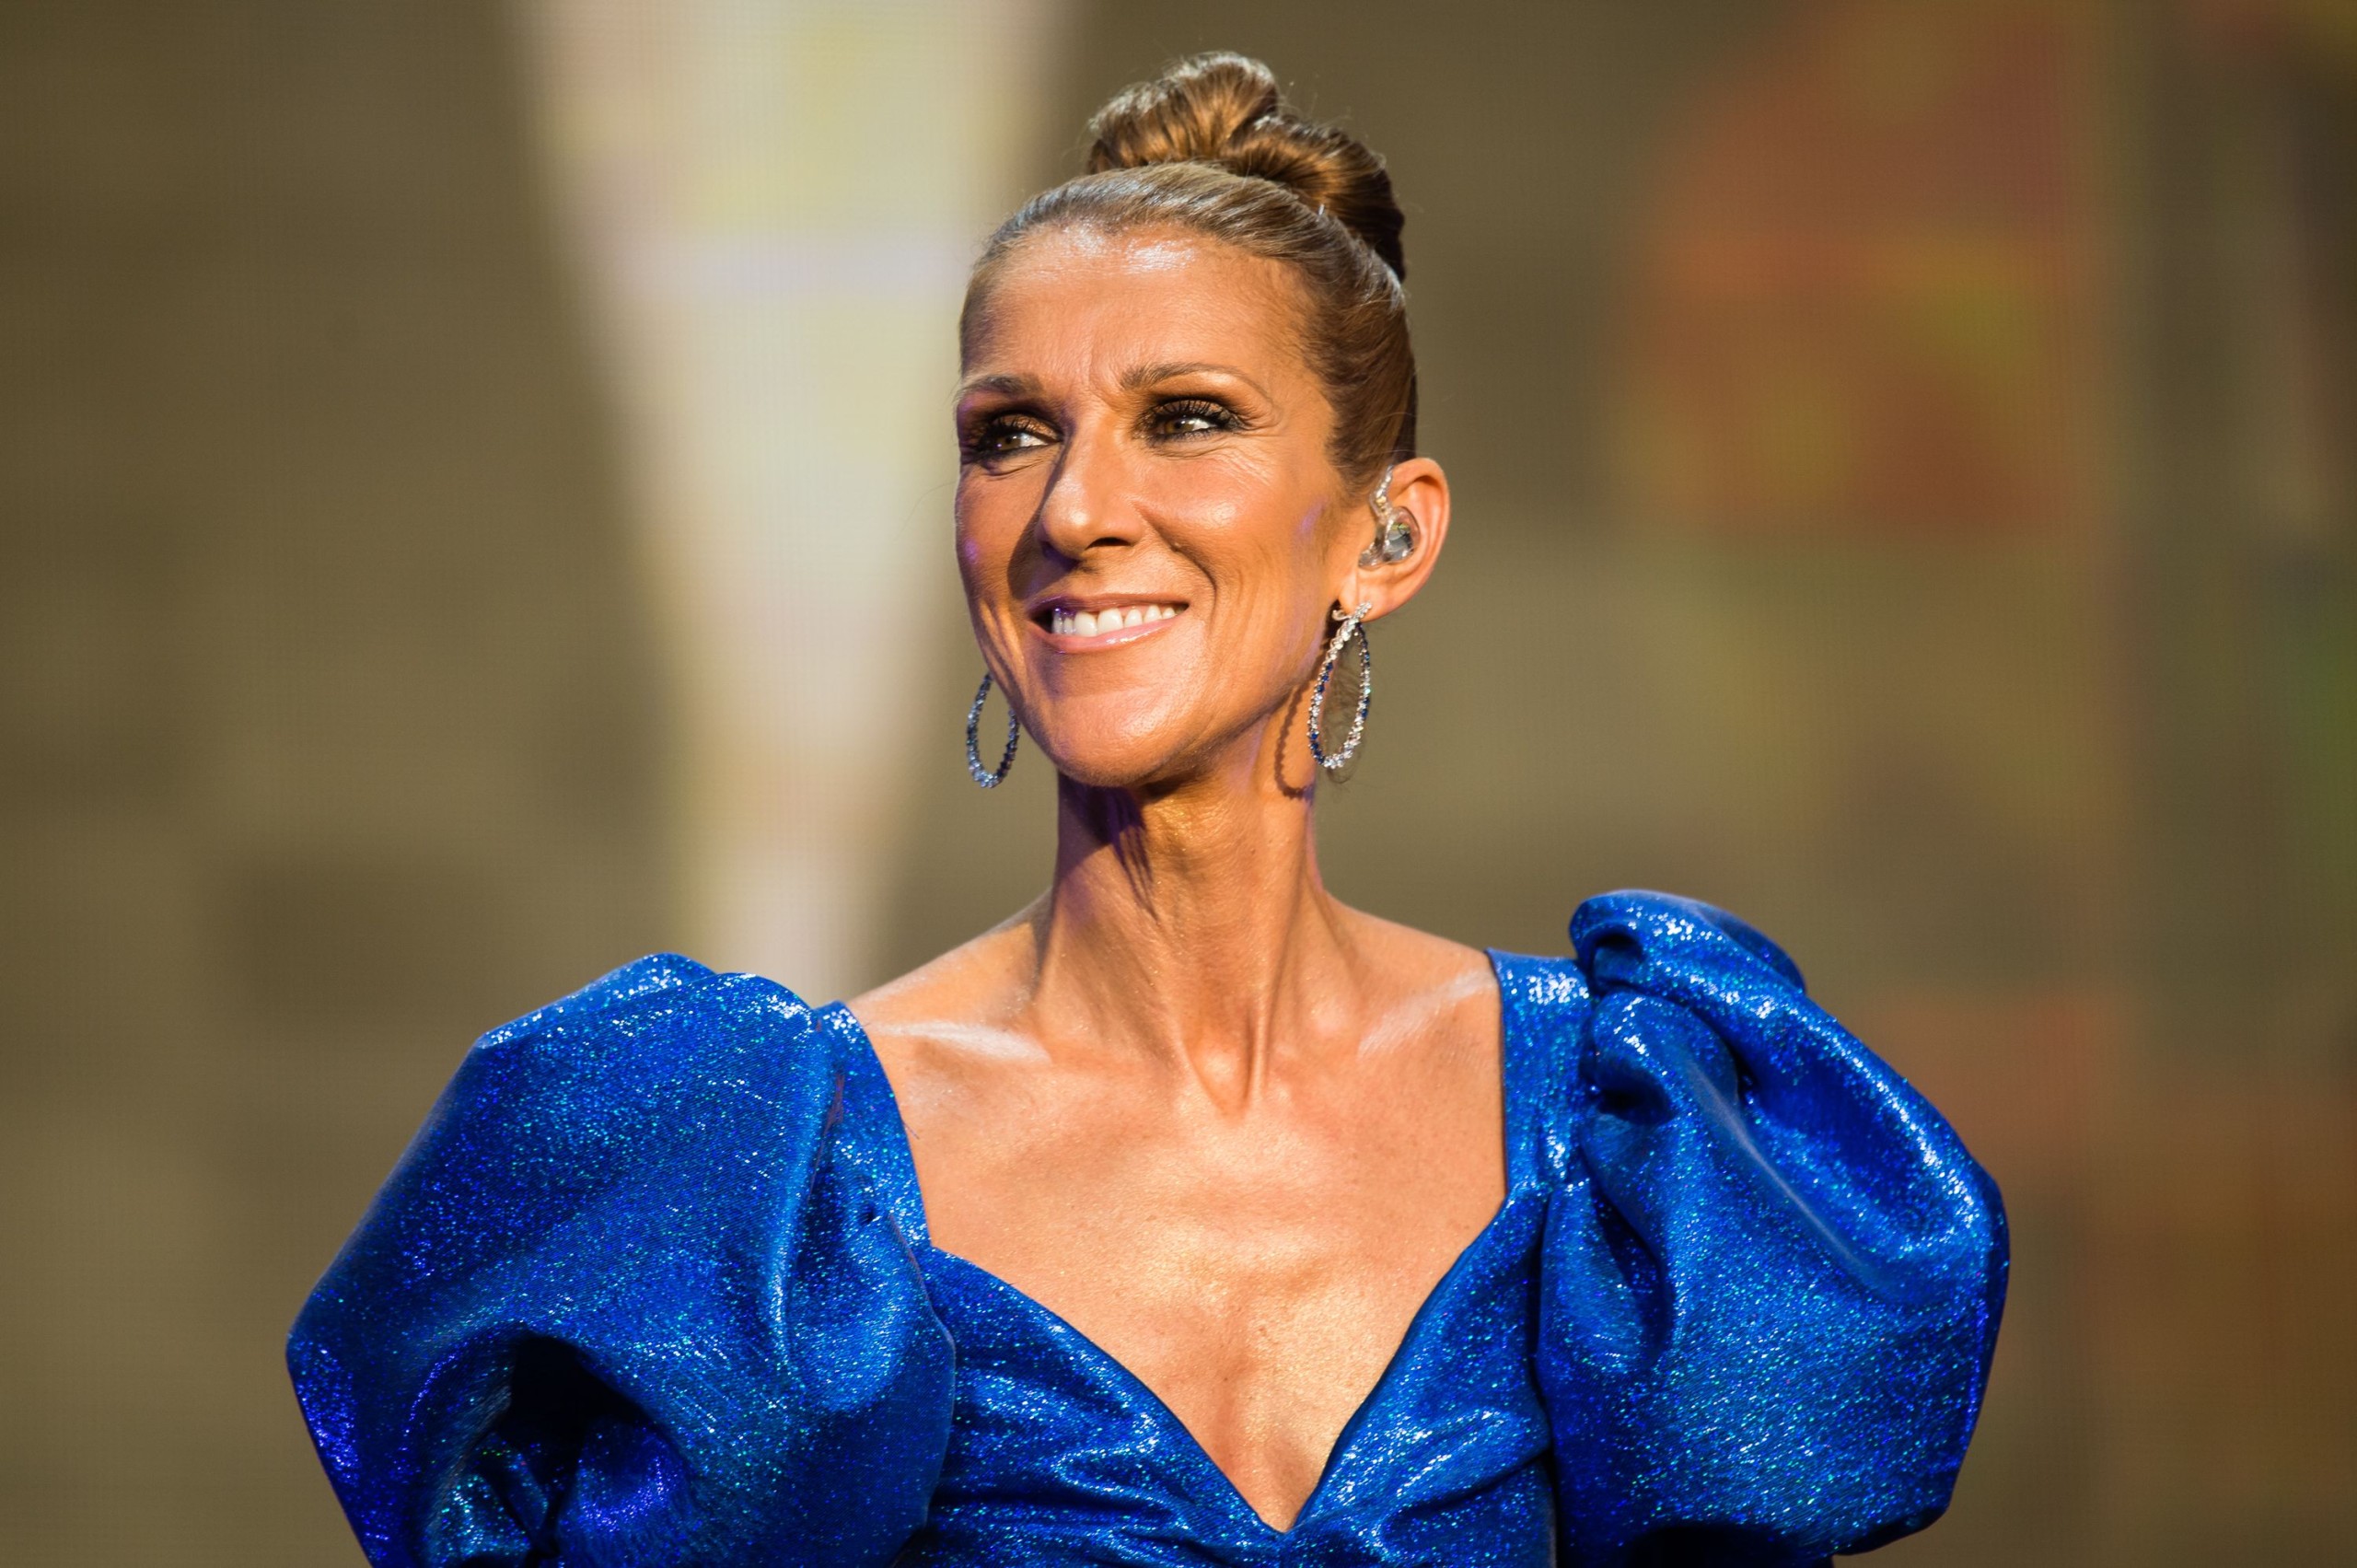 celine dion biography summary